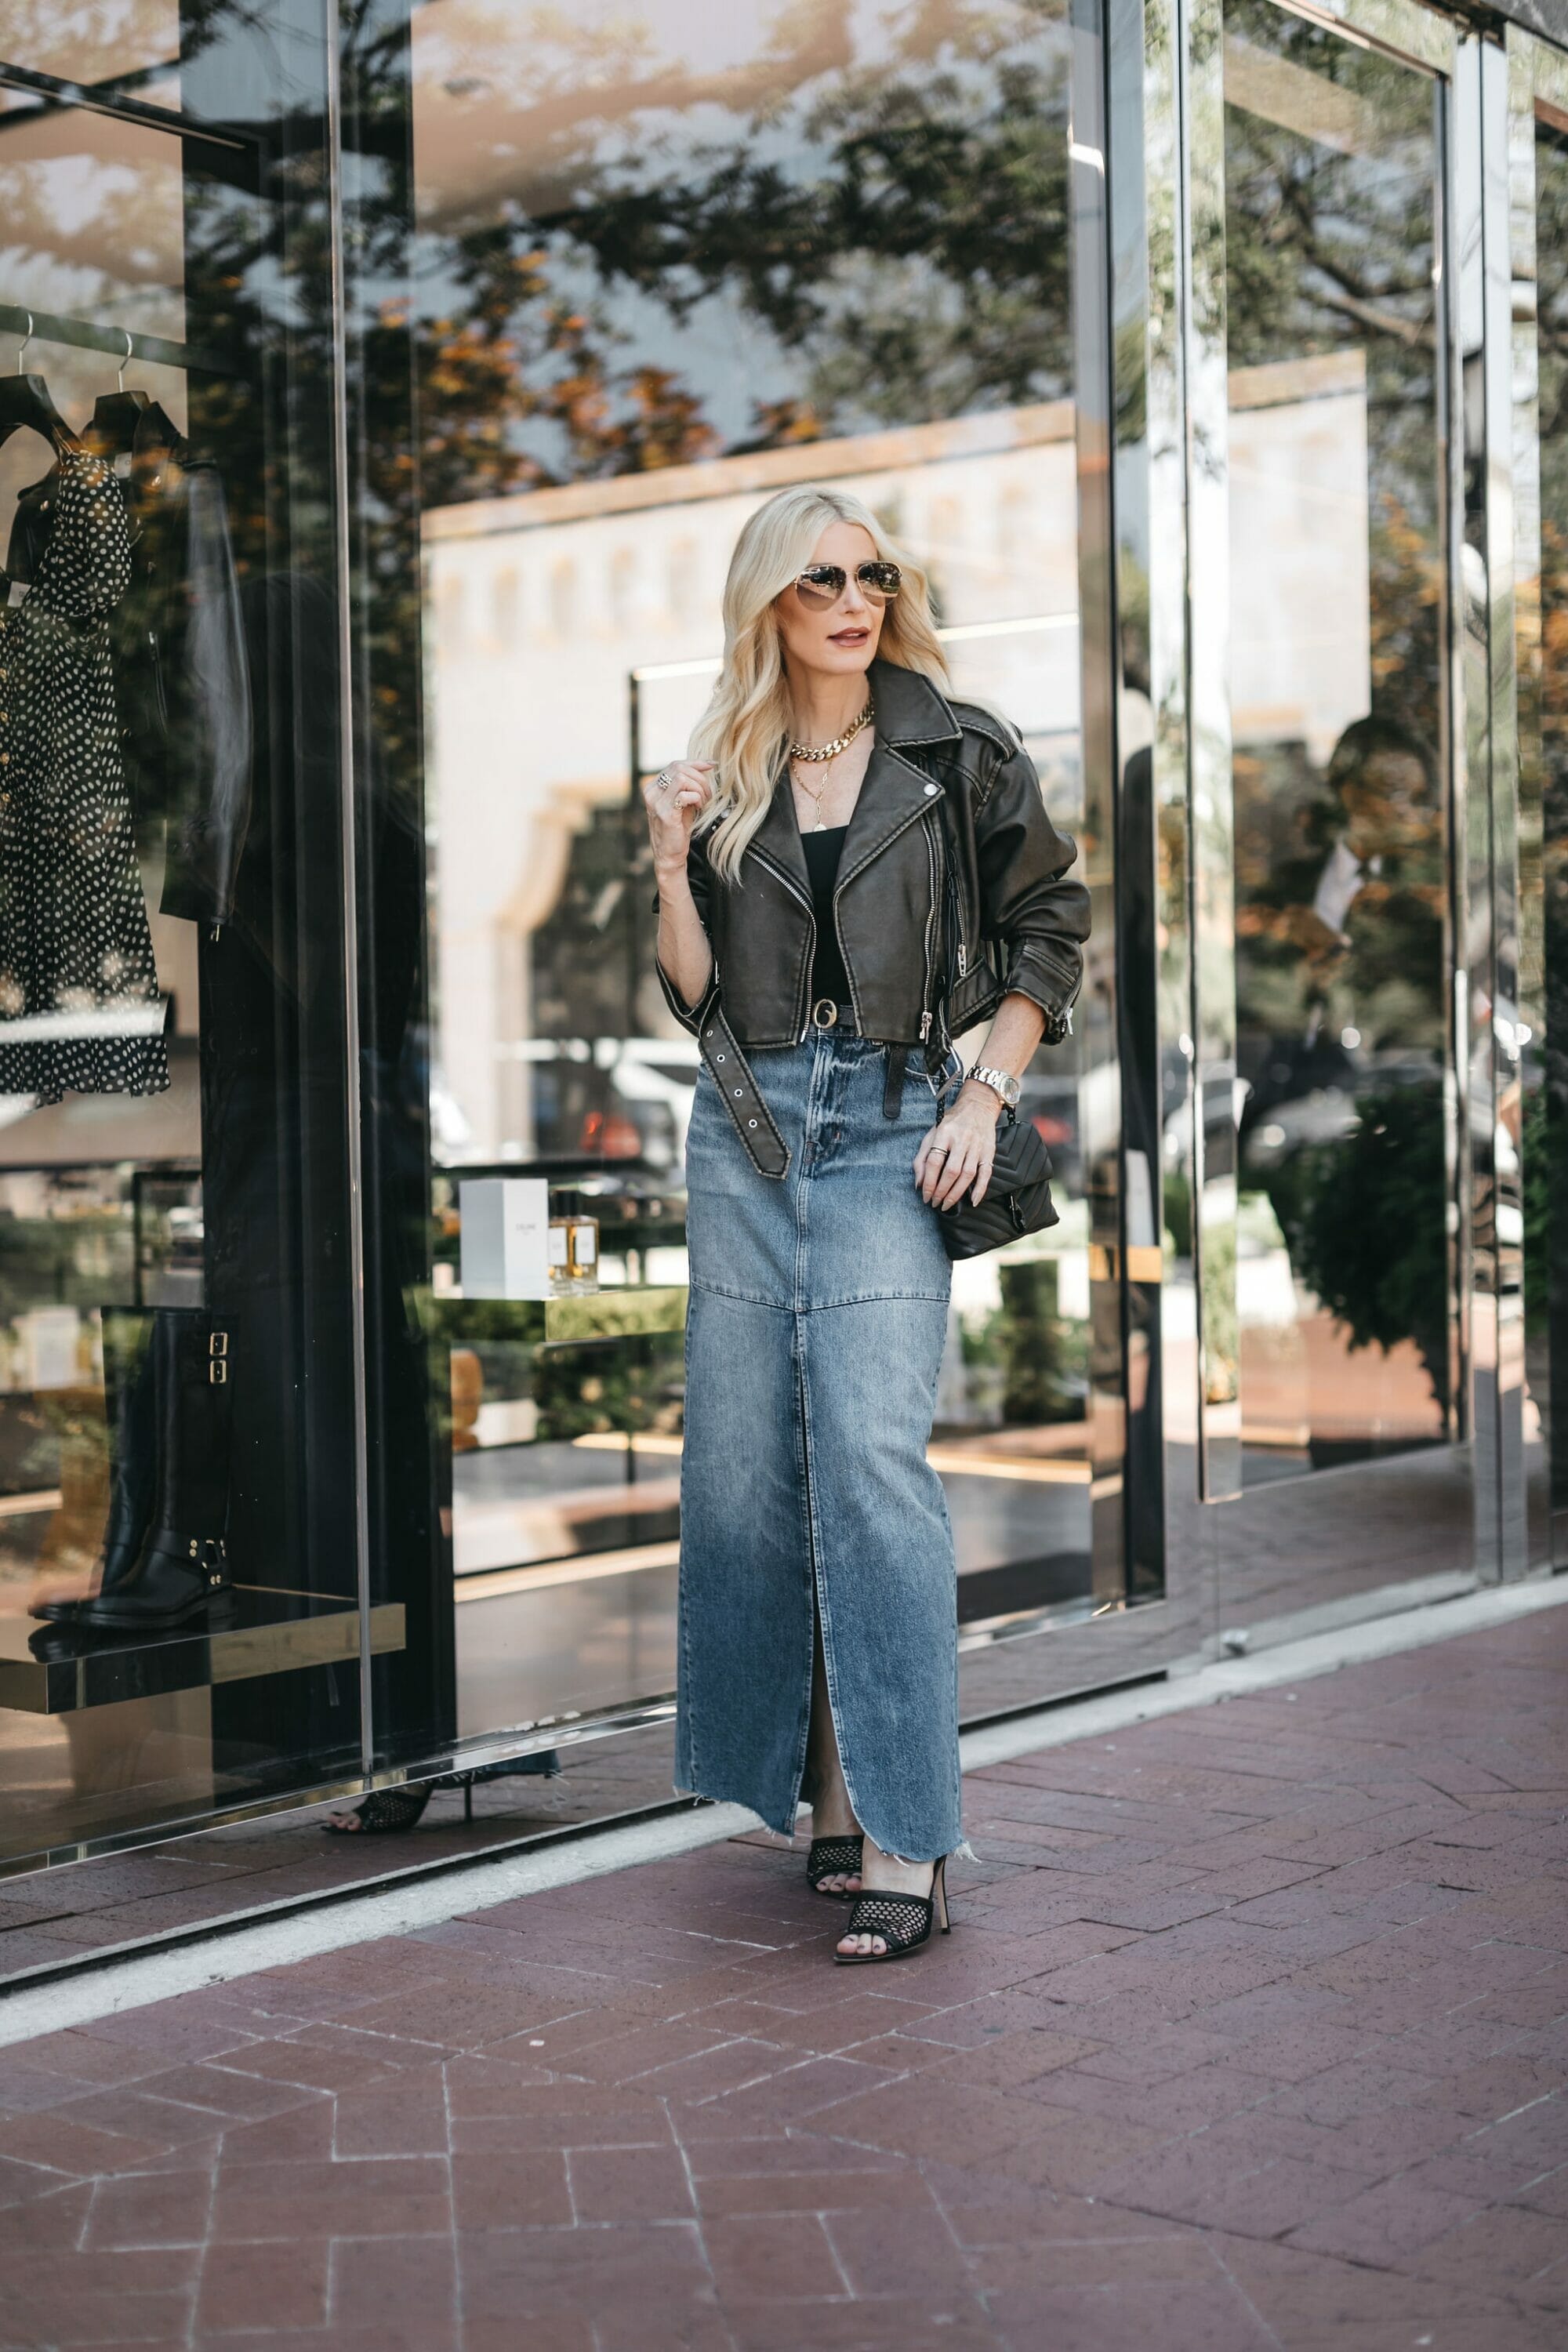 Over 40 Dallas fashion stylist wear reformation denim skirt with leather jacket and black bodysuit as one of August's top 5 best sellers.